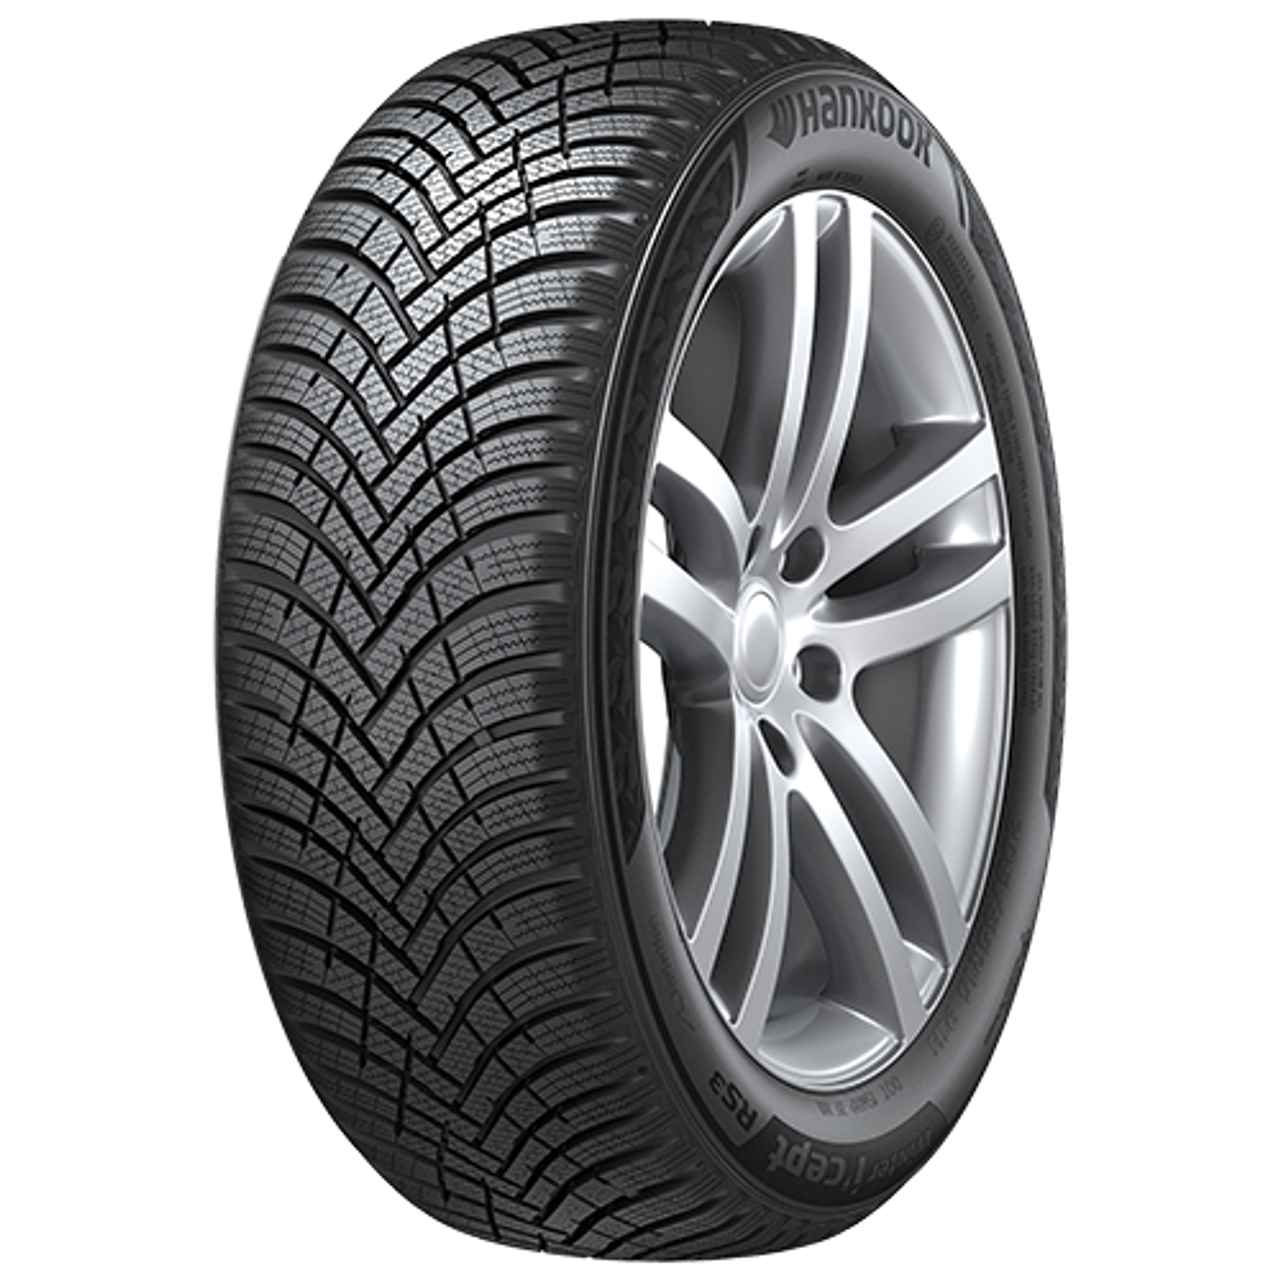 HANKOOK WINTER I*CEPT RS3 225/45R17 94V BSW